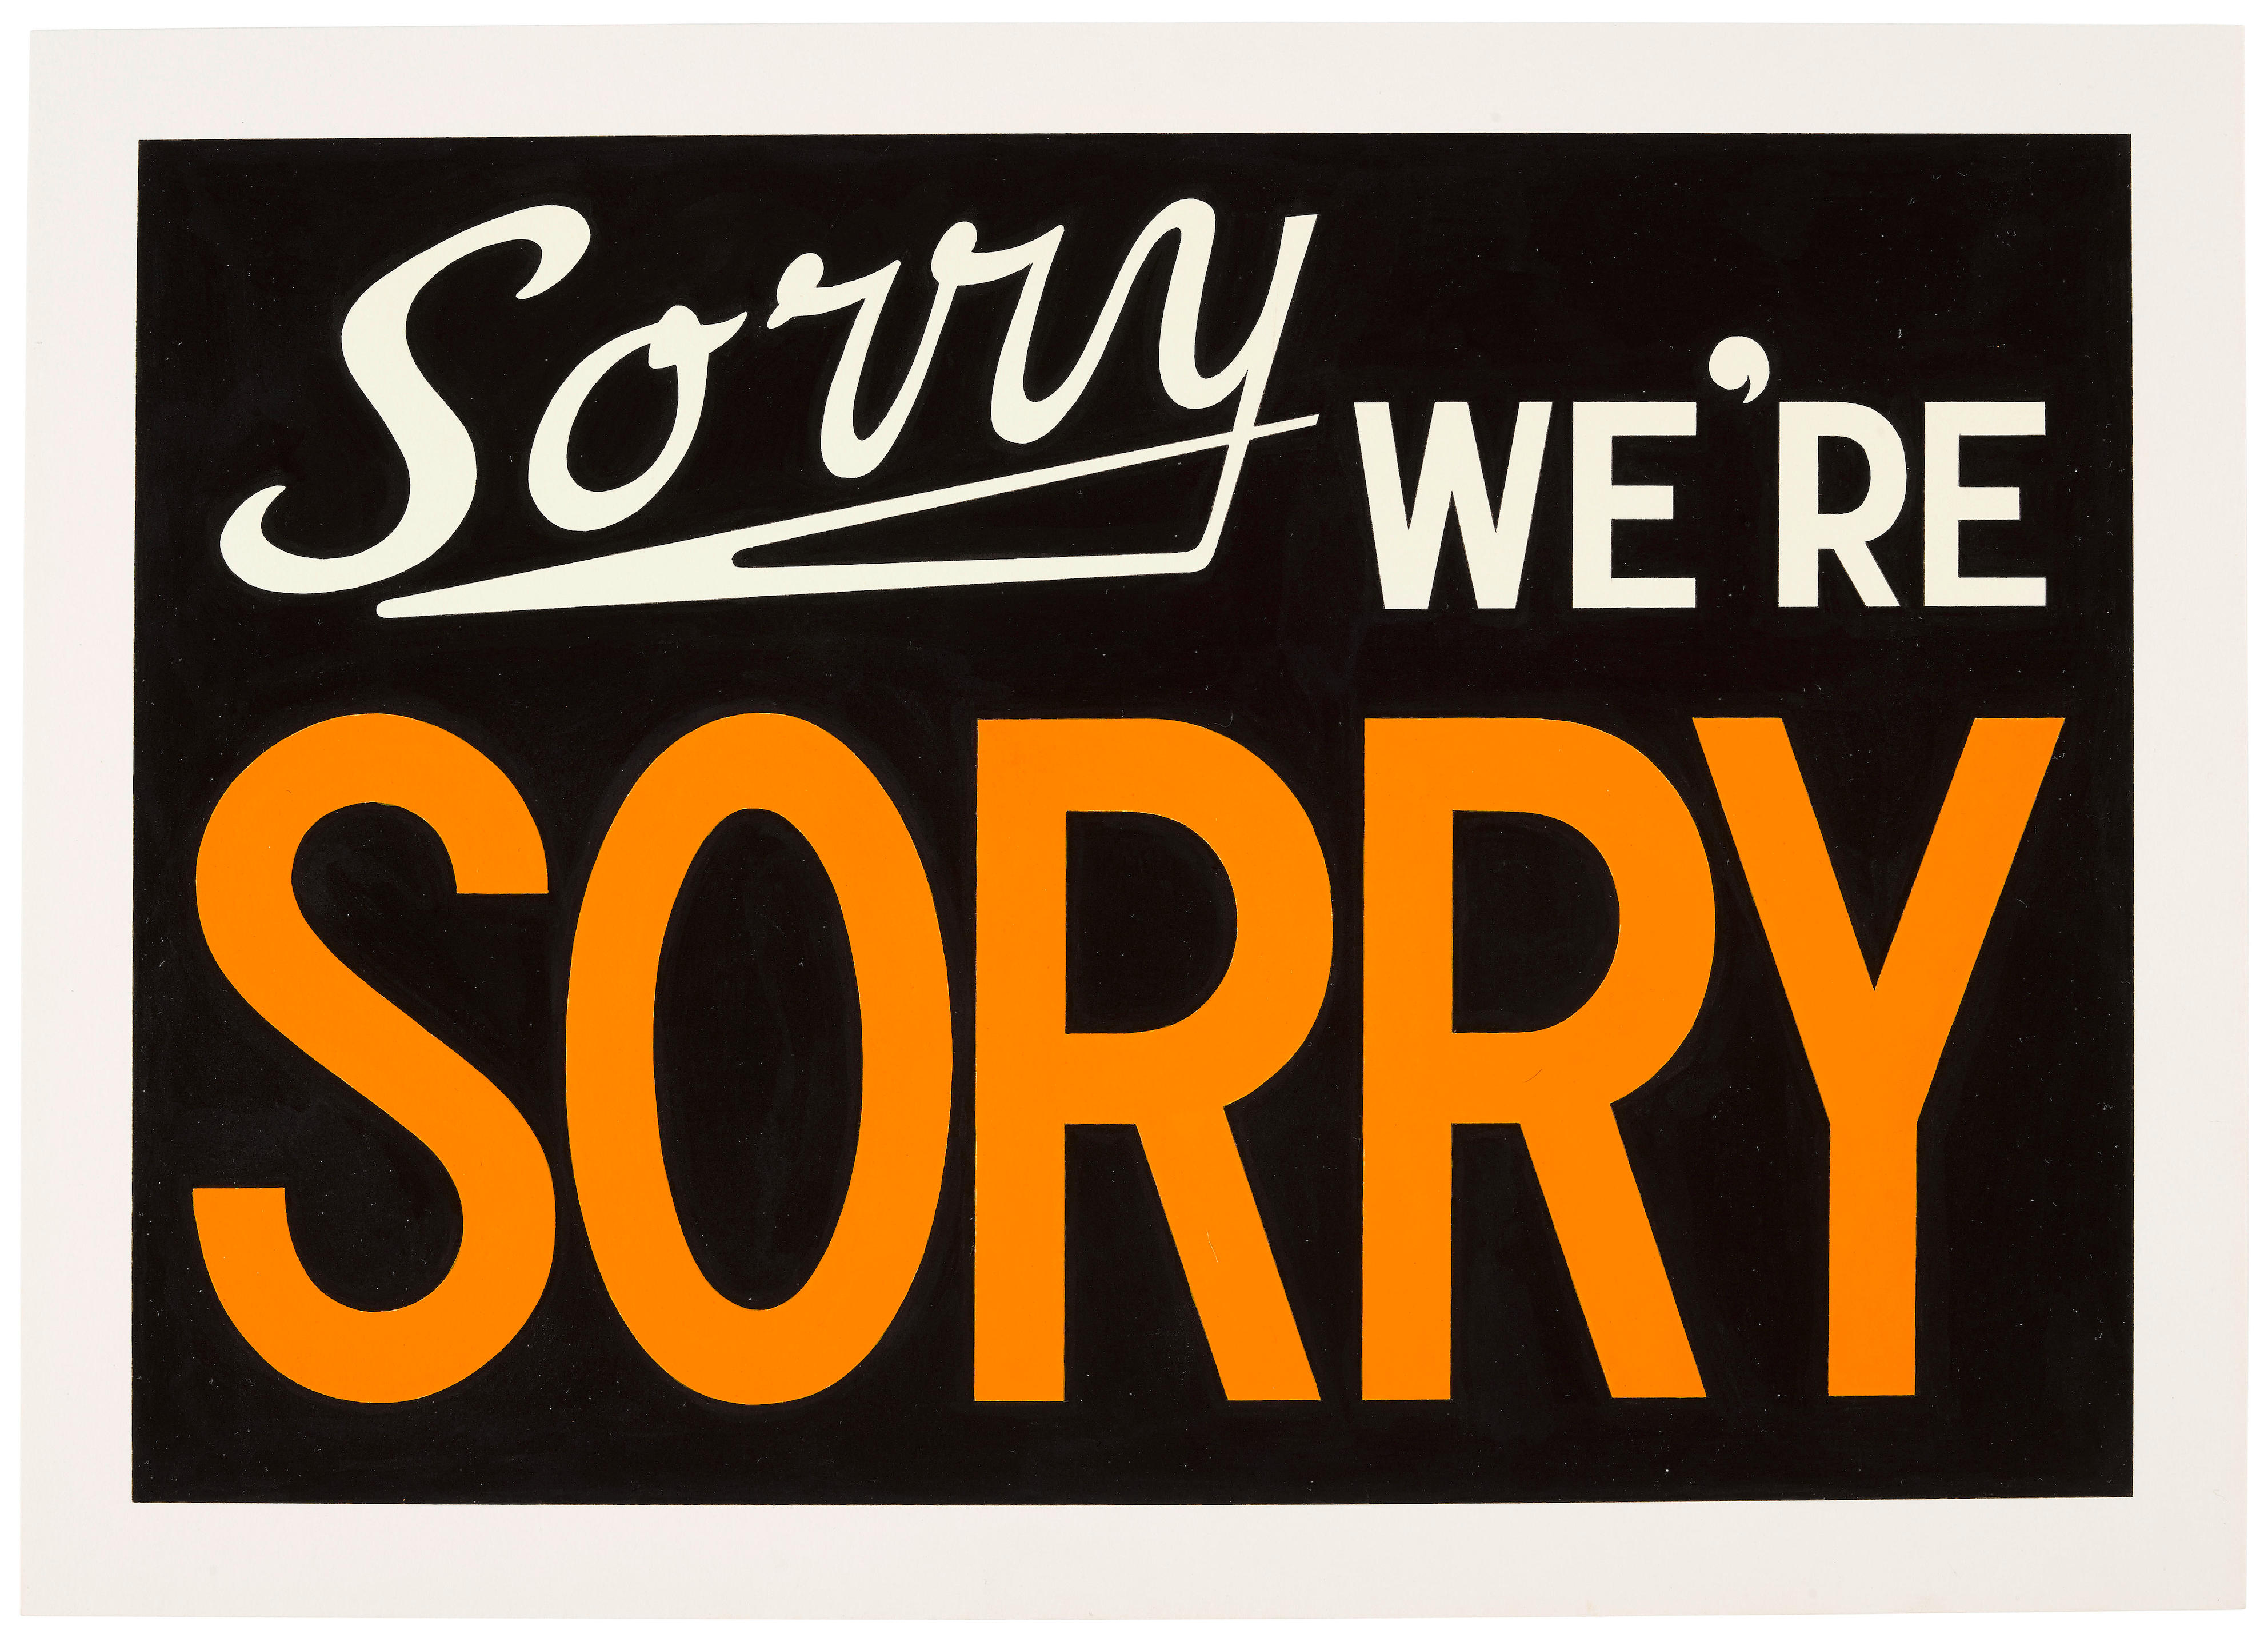 We re sorry those. "Sorry we are British. We're sorry. Sorry we’re drinking logo.